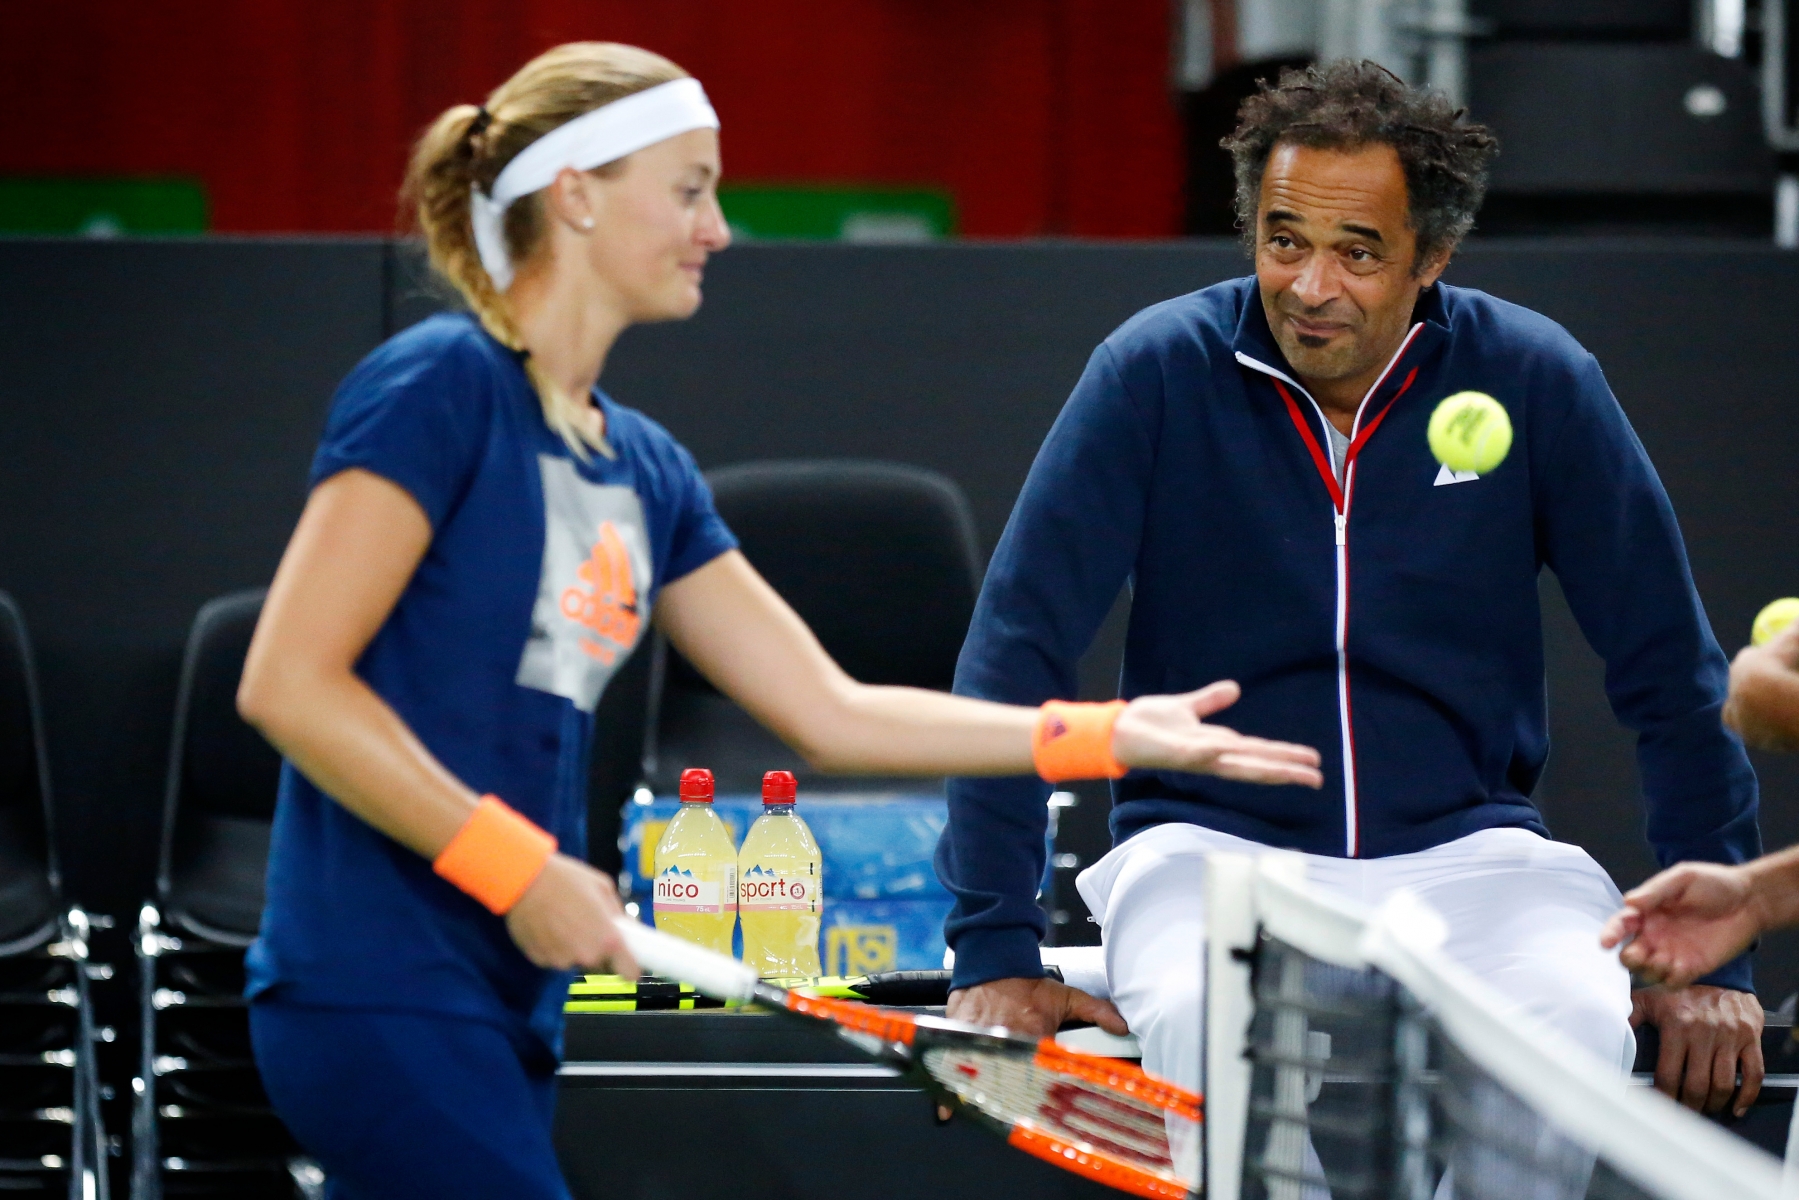 French Team captain Yannick Noah with Kristina Mladenovic, of France during a training session of the French Fed Cup Team prior the Fed Cup World Group first round match between Switzerland and France, at Palexpo, in Geneva, Tuesday 7 February 2017. The Fed Cup World Group first round Switzerland vs France will take place from 11 to February 12.

(KEYSTONE/Magali Girardin) SUISSE FEDCUP TRAINING SESSION